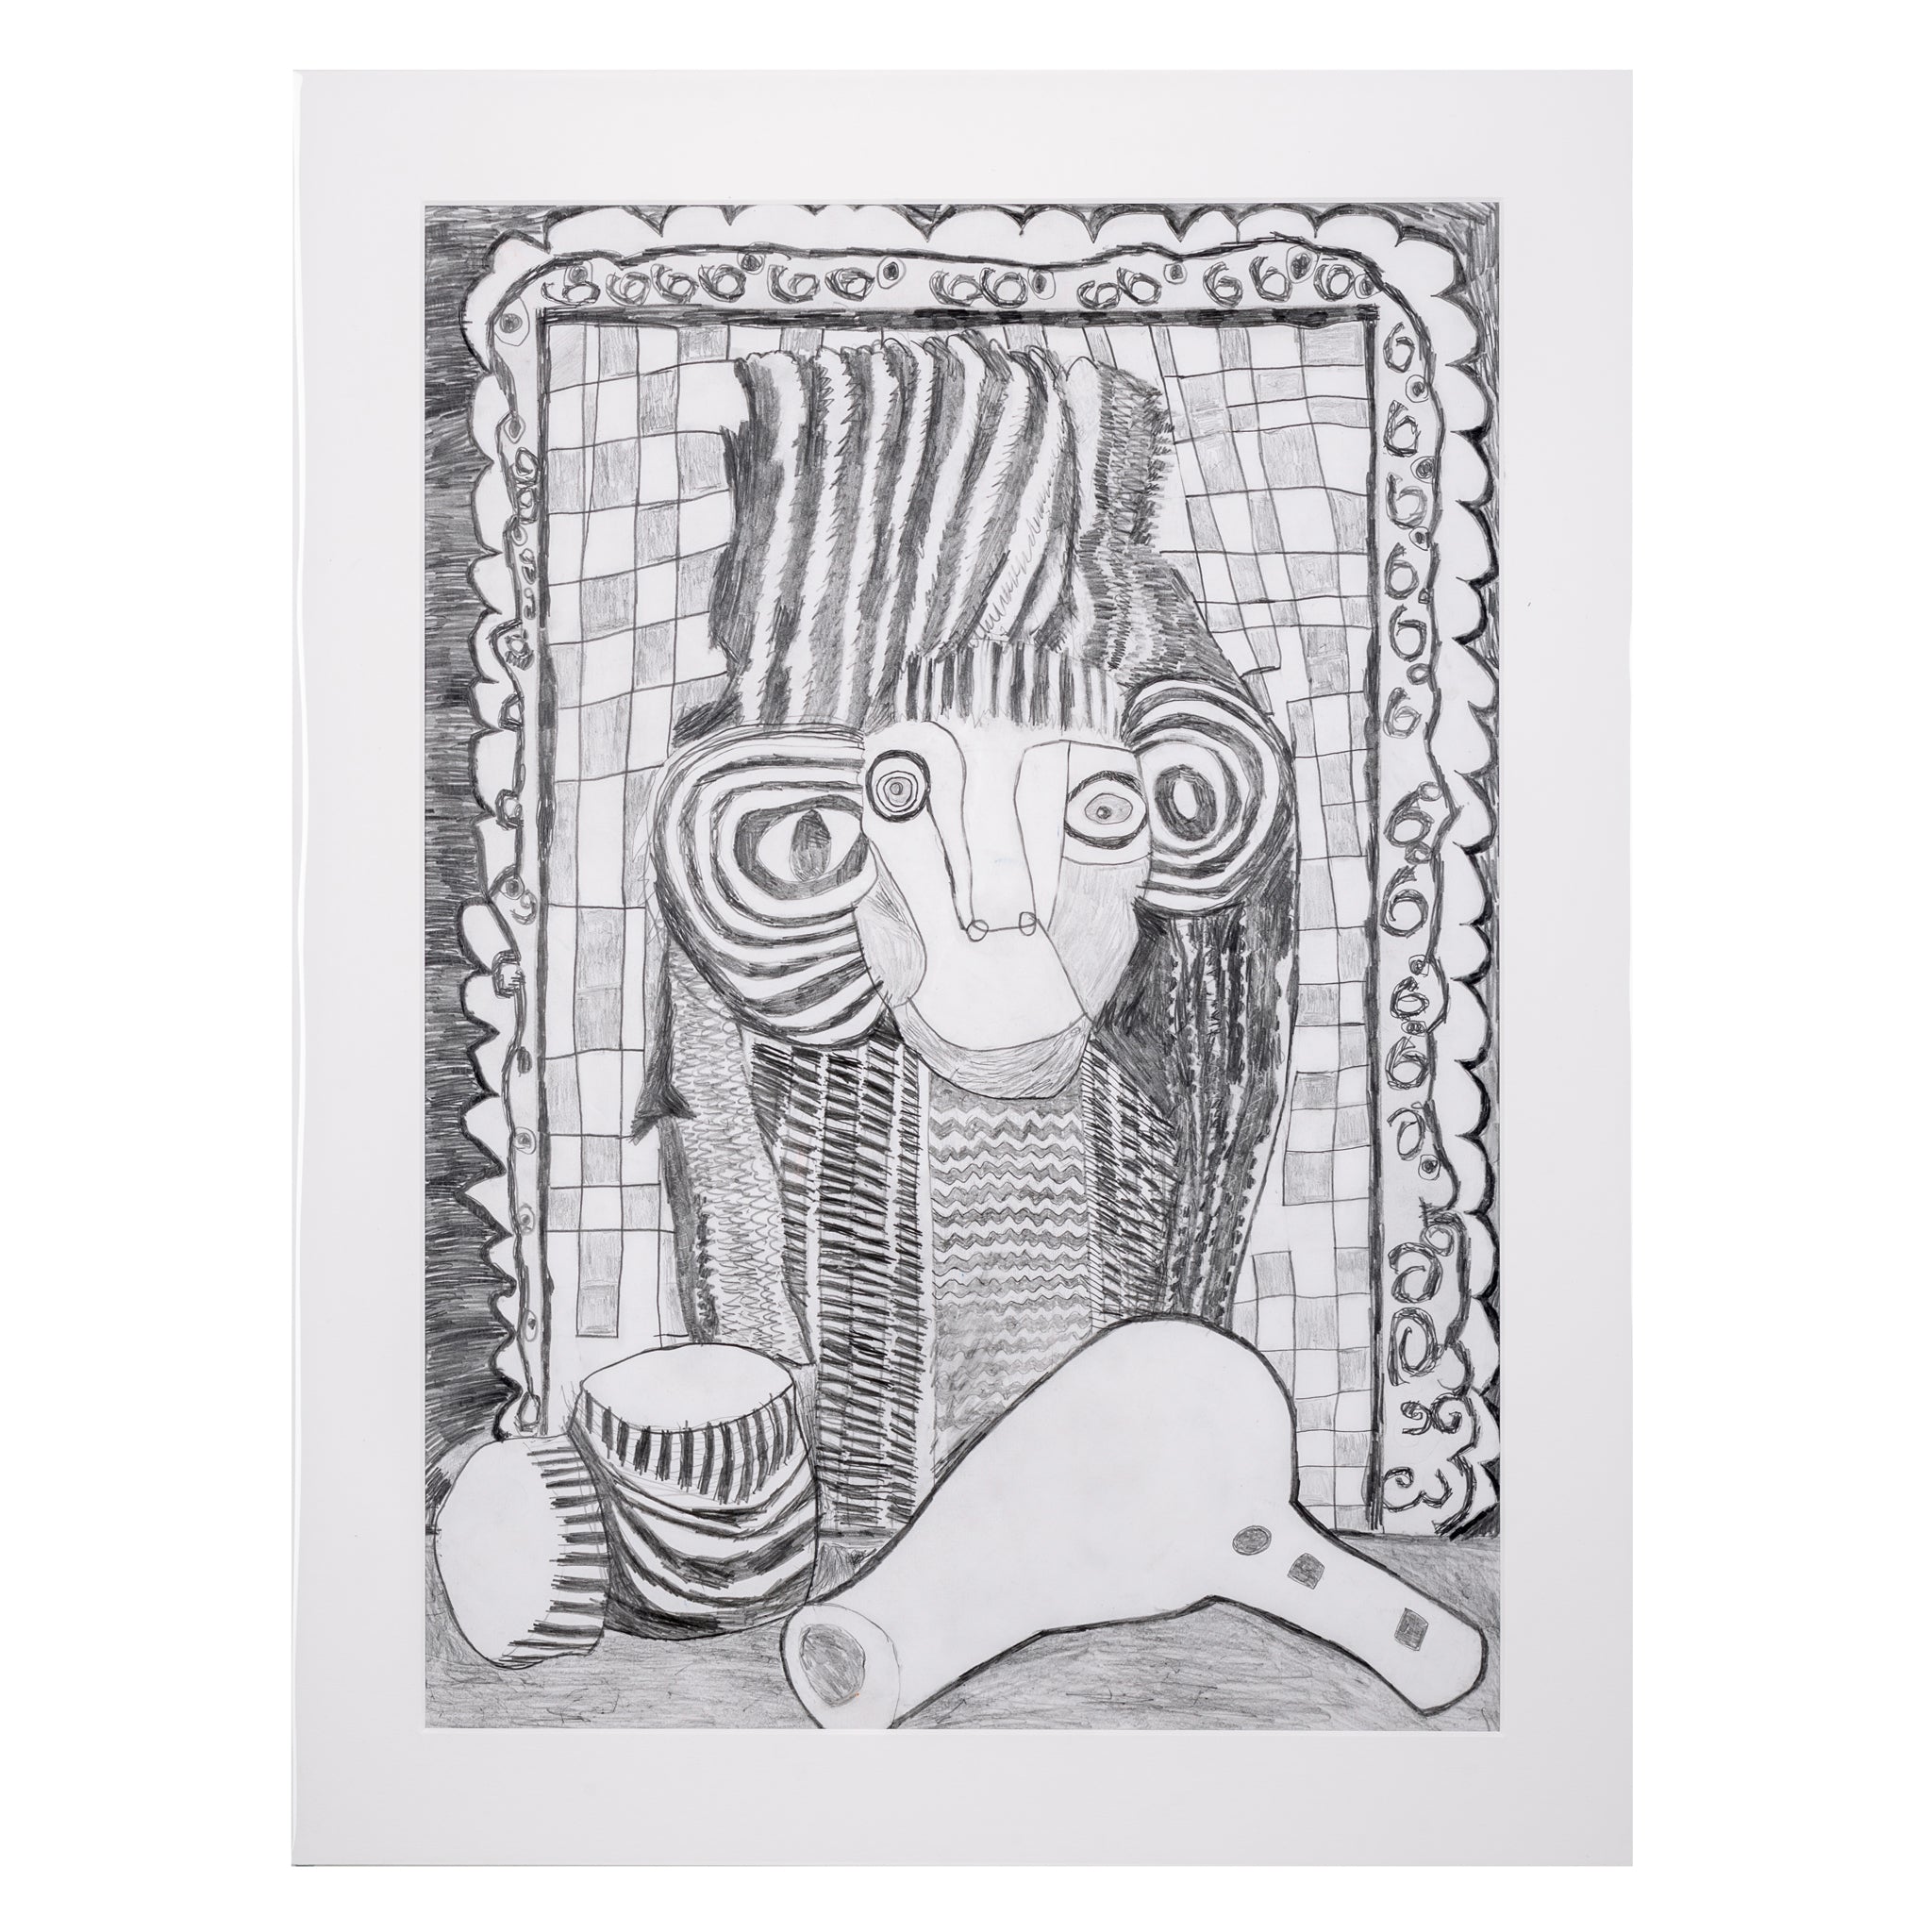 Hand drawn picture in pencil of a woman and a hair dryer called Francesca